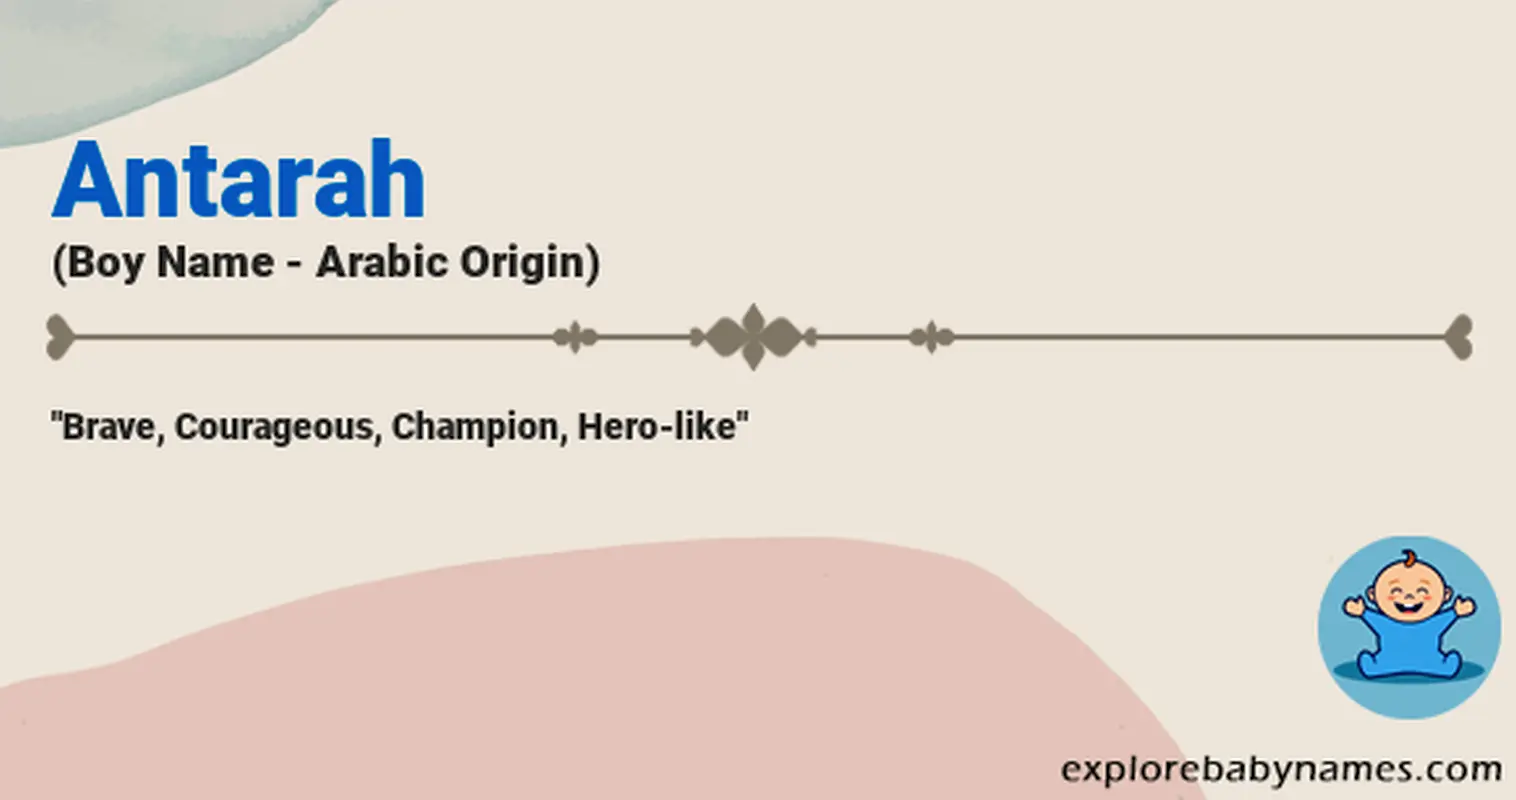 Meaning of Antarah